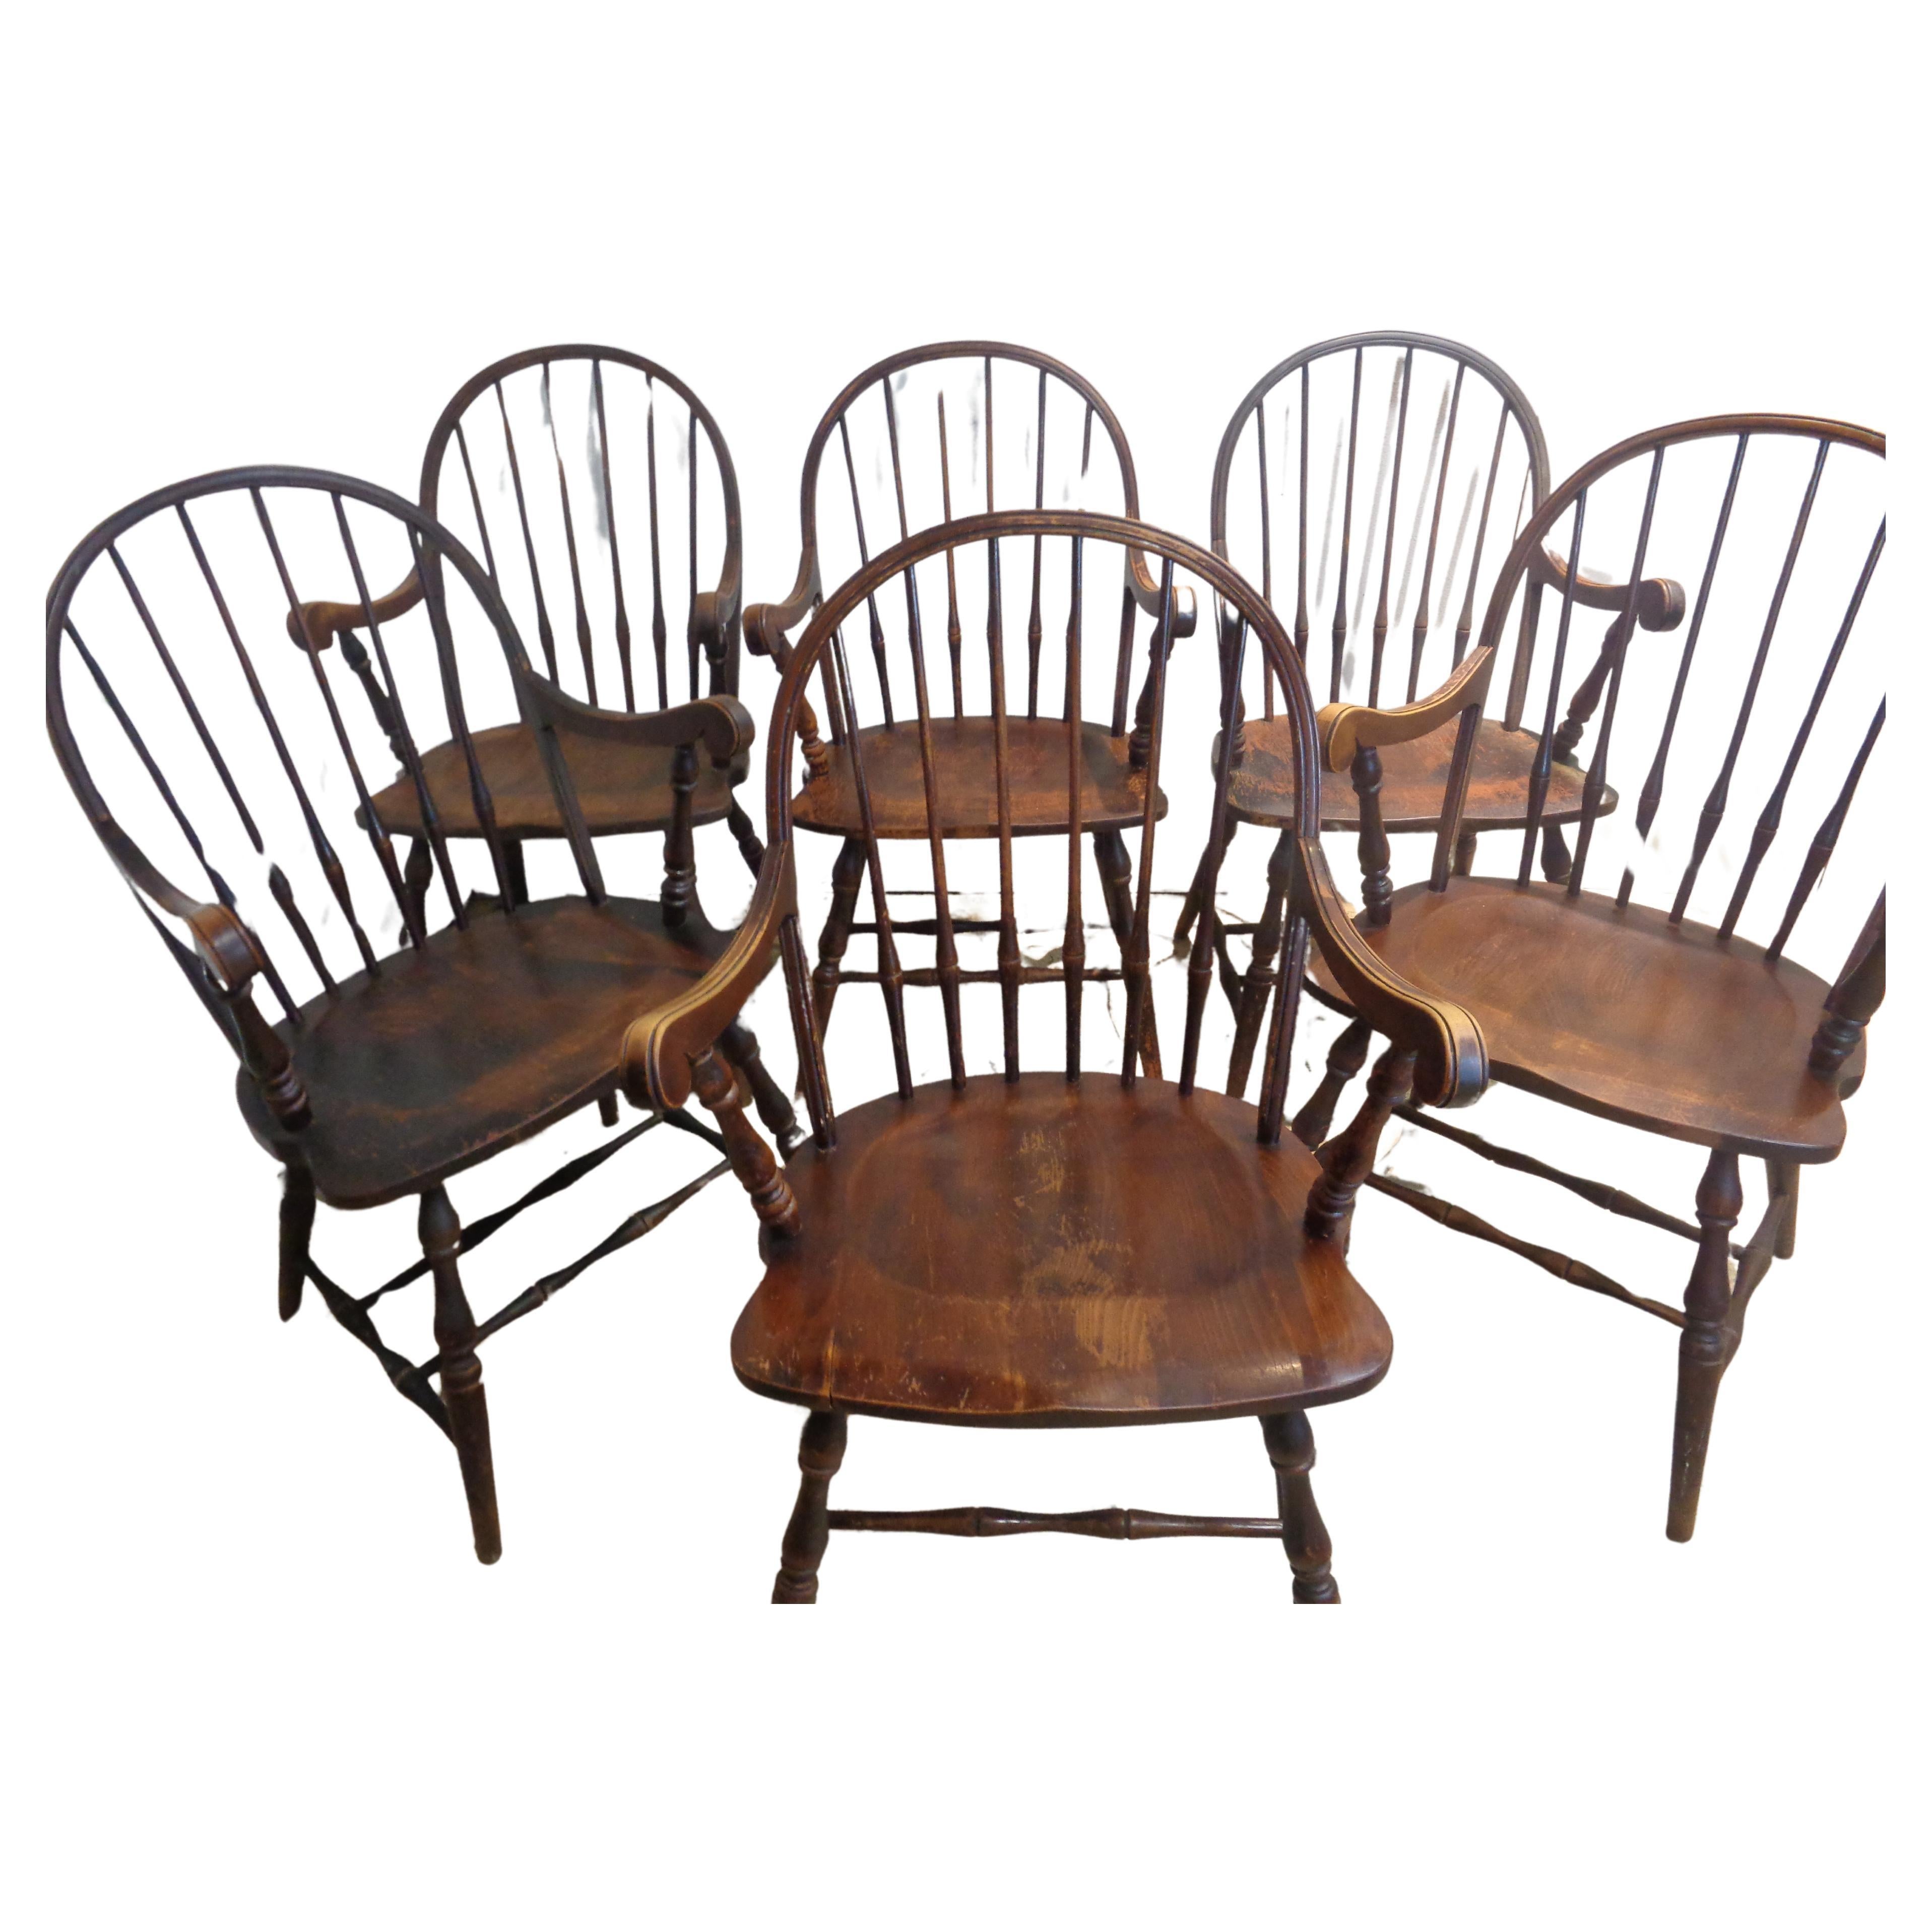 A good looking matched set of six American hoop back windsor armchairs with sculpted arms / subtle saddle seats / well turned details at backs, legs and stretchers. Overall nicely aged old surface color patina. Circa 1940. Measure 37